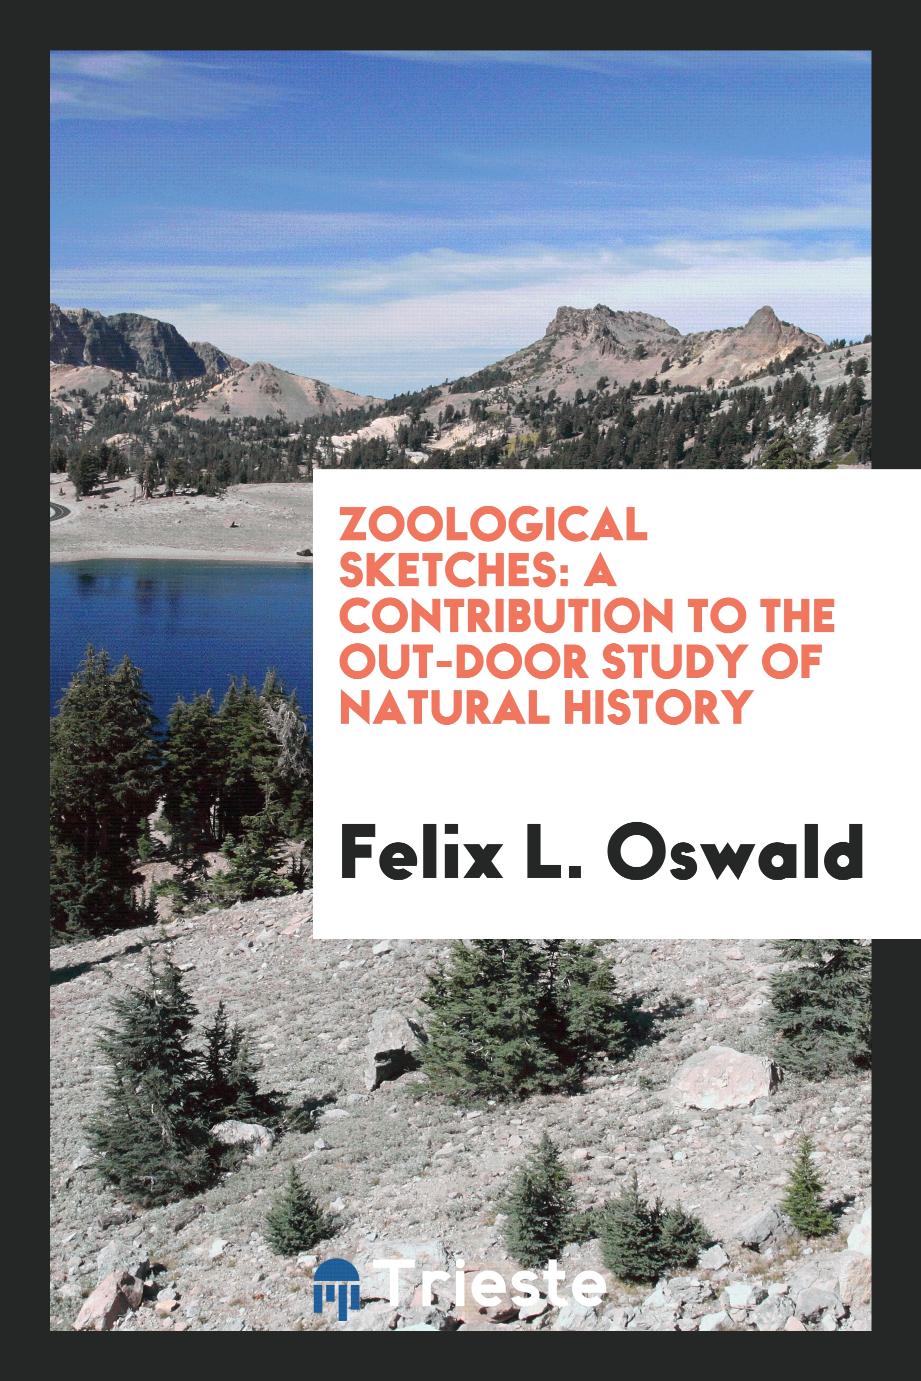 Zoological sketches: a contribution to the out-door study of natural history